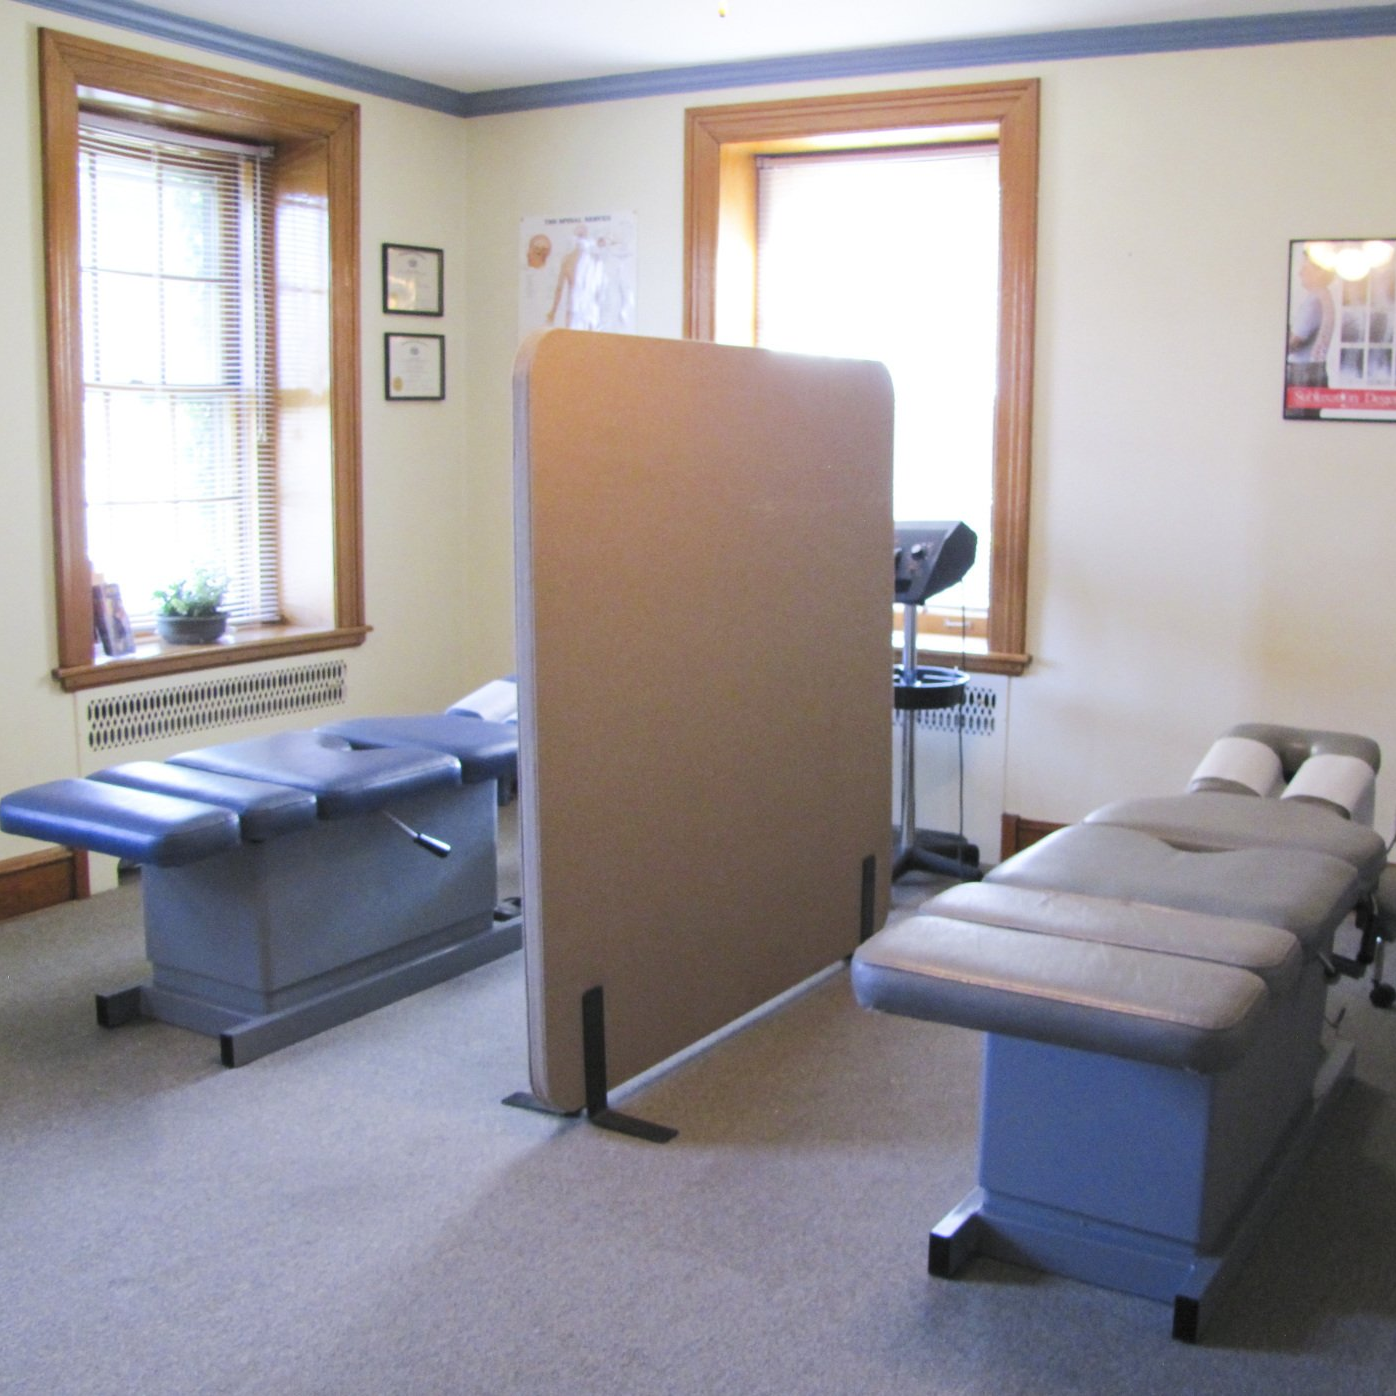 Providing safe, skilled chiropractic adjustments from our Berks County Chiropractor's Office